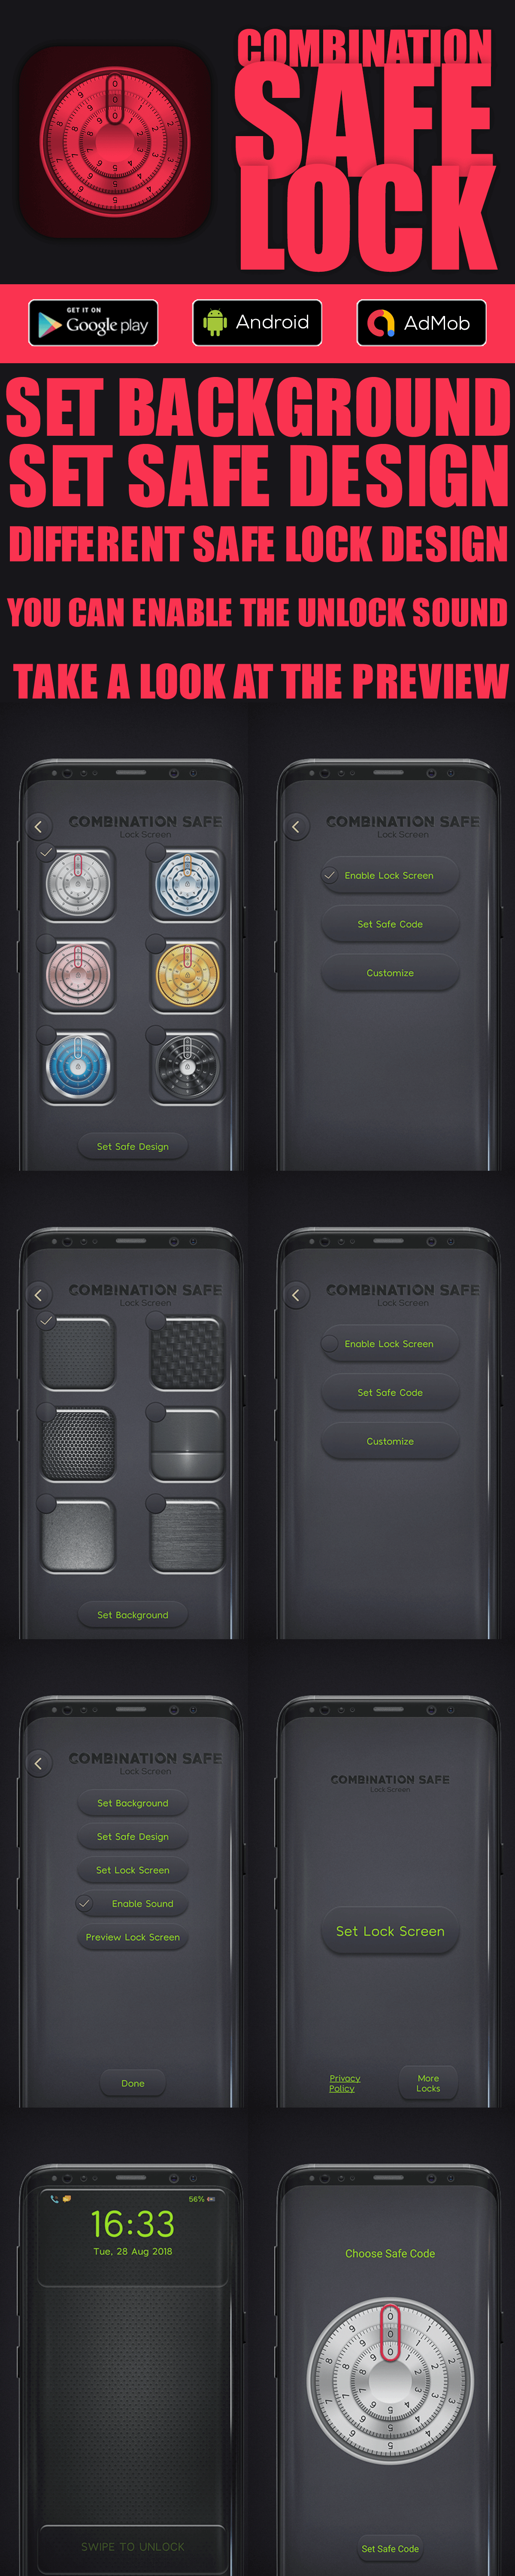 Combination Safe Lock Screen | Android App | Admob Ads - 1